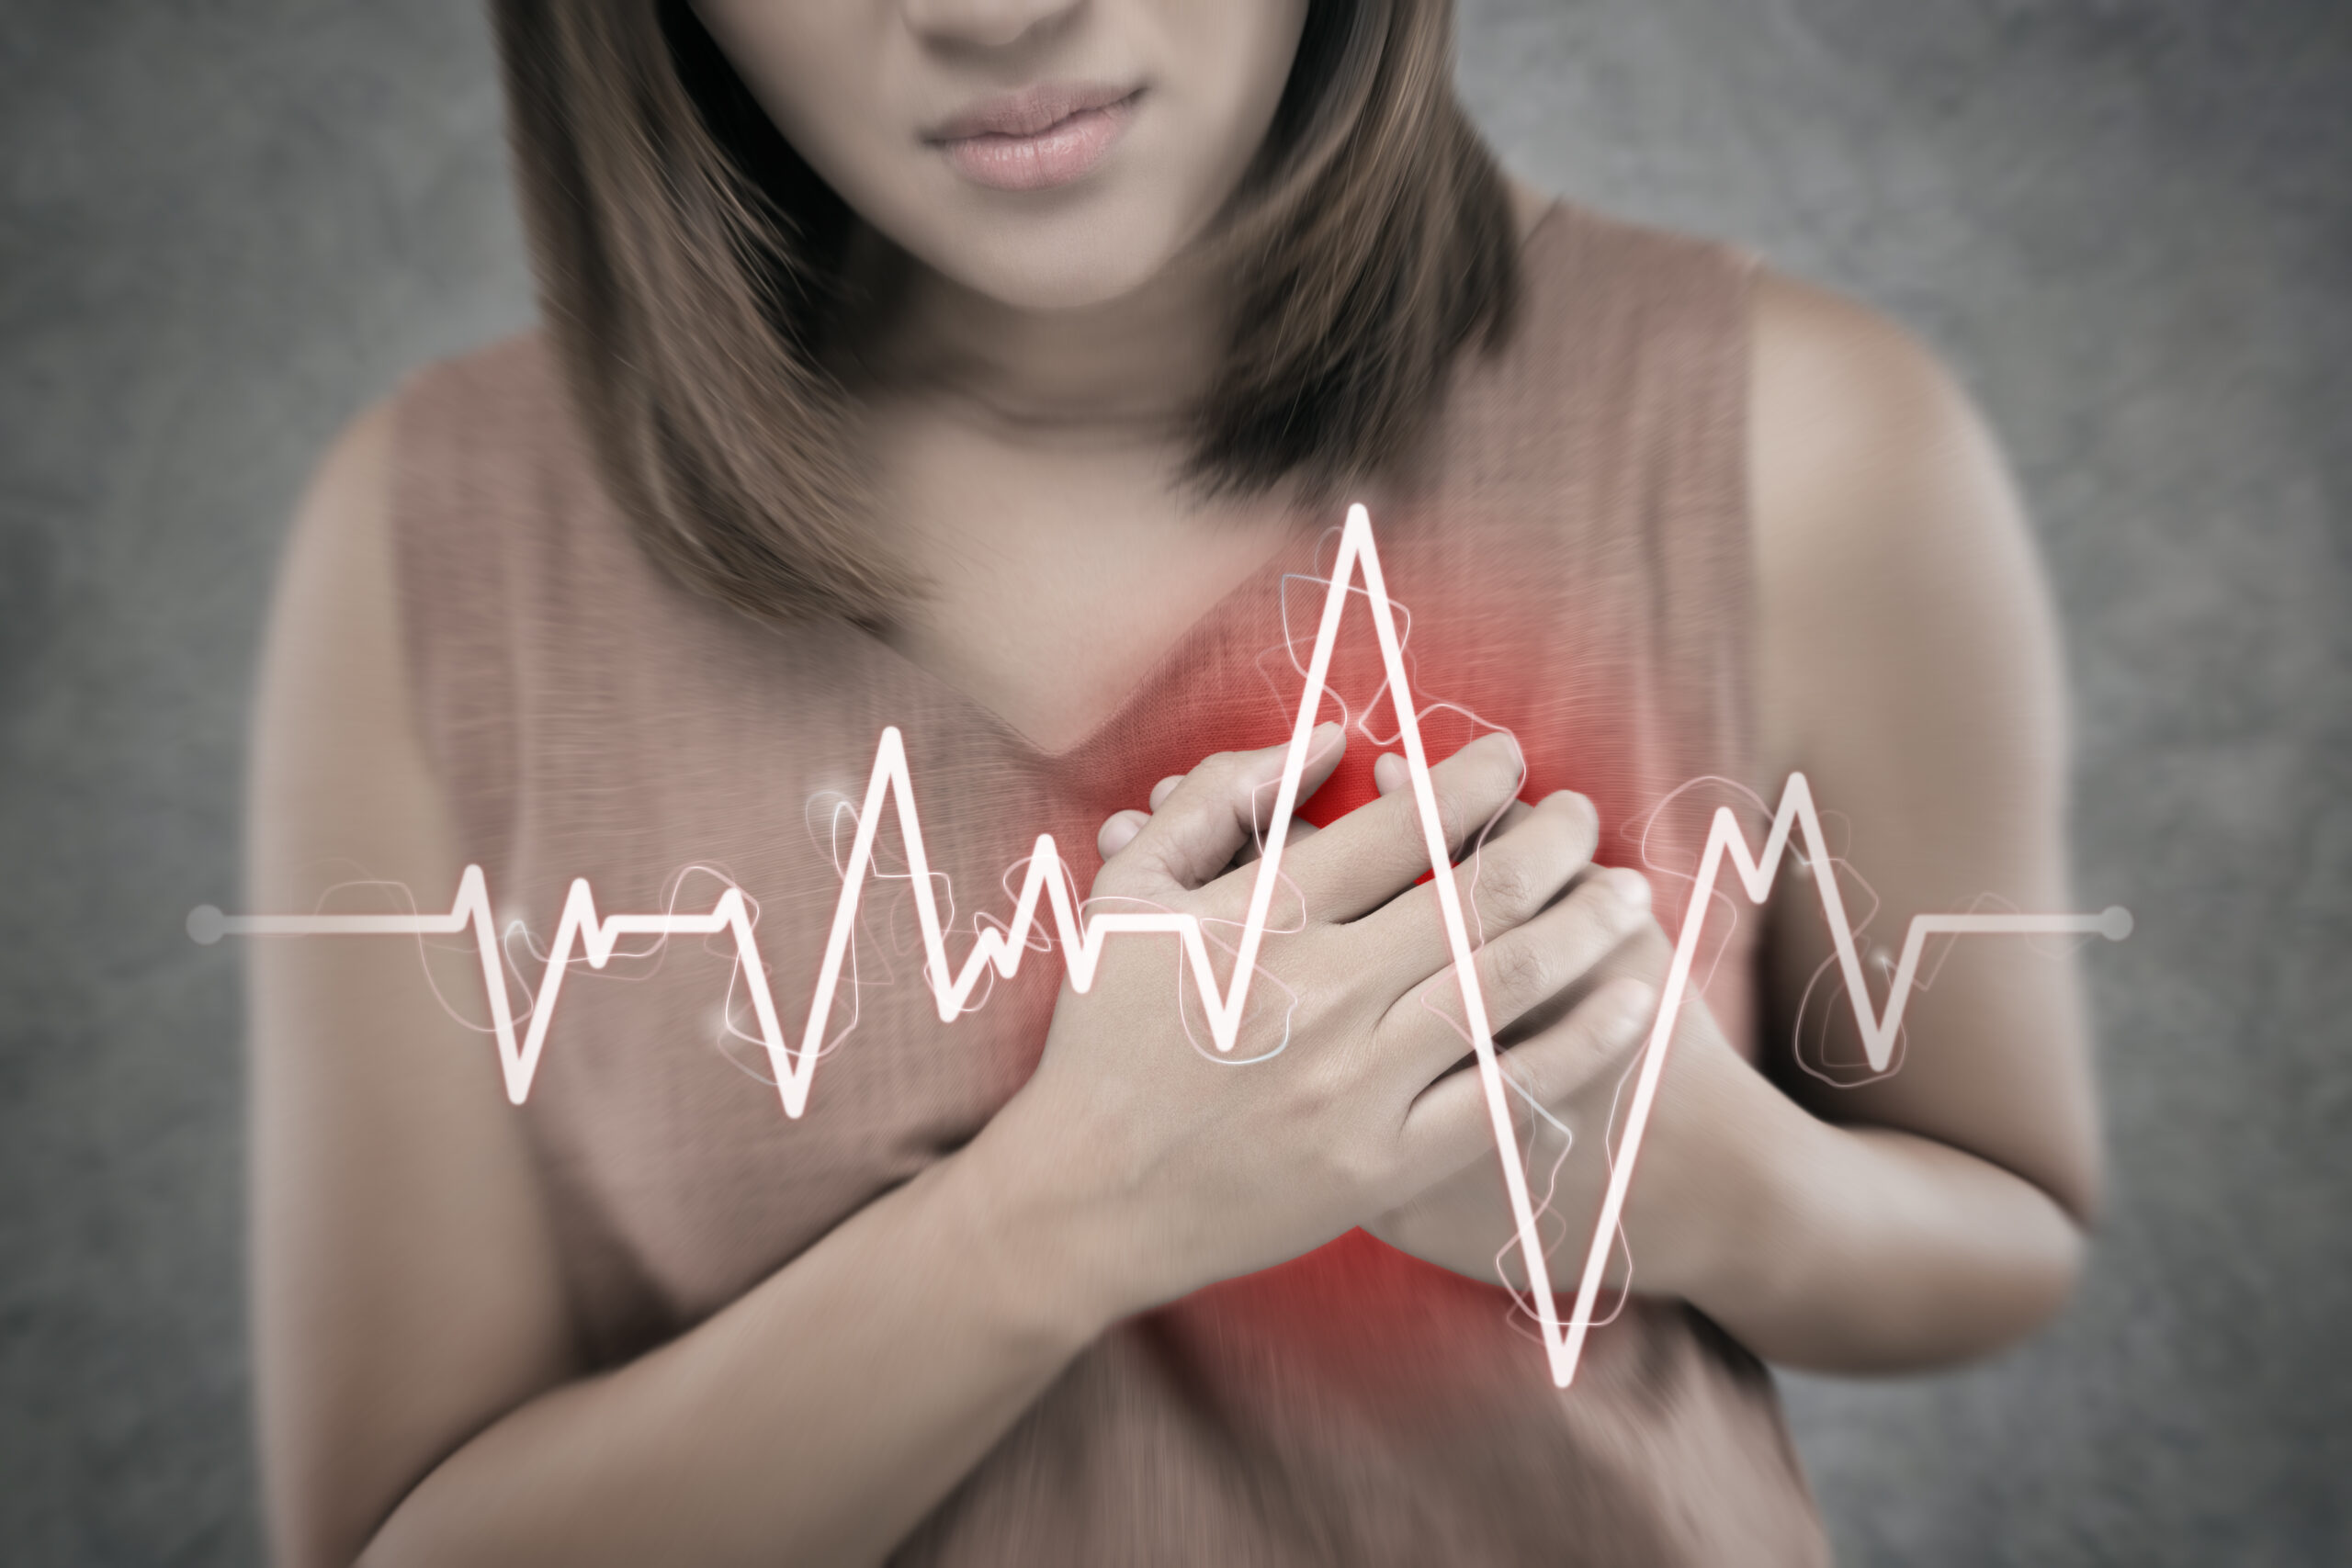 Men with chest pain receive faster, more medical attention than women